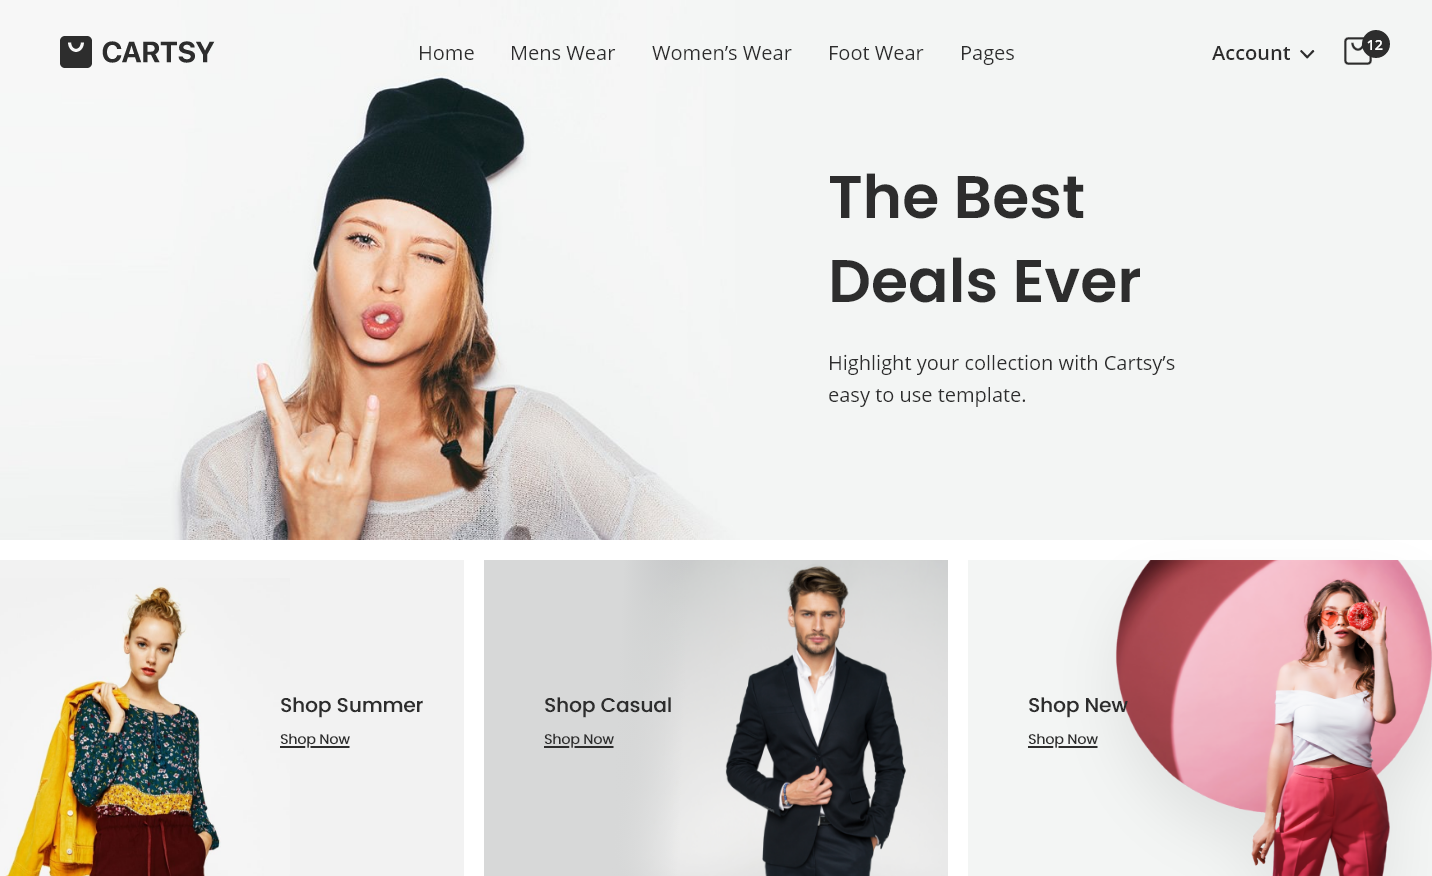 How To Build a Fashion E-Commerce Site With WordPress & WooCommerce